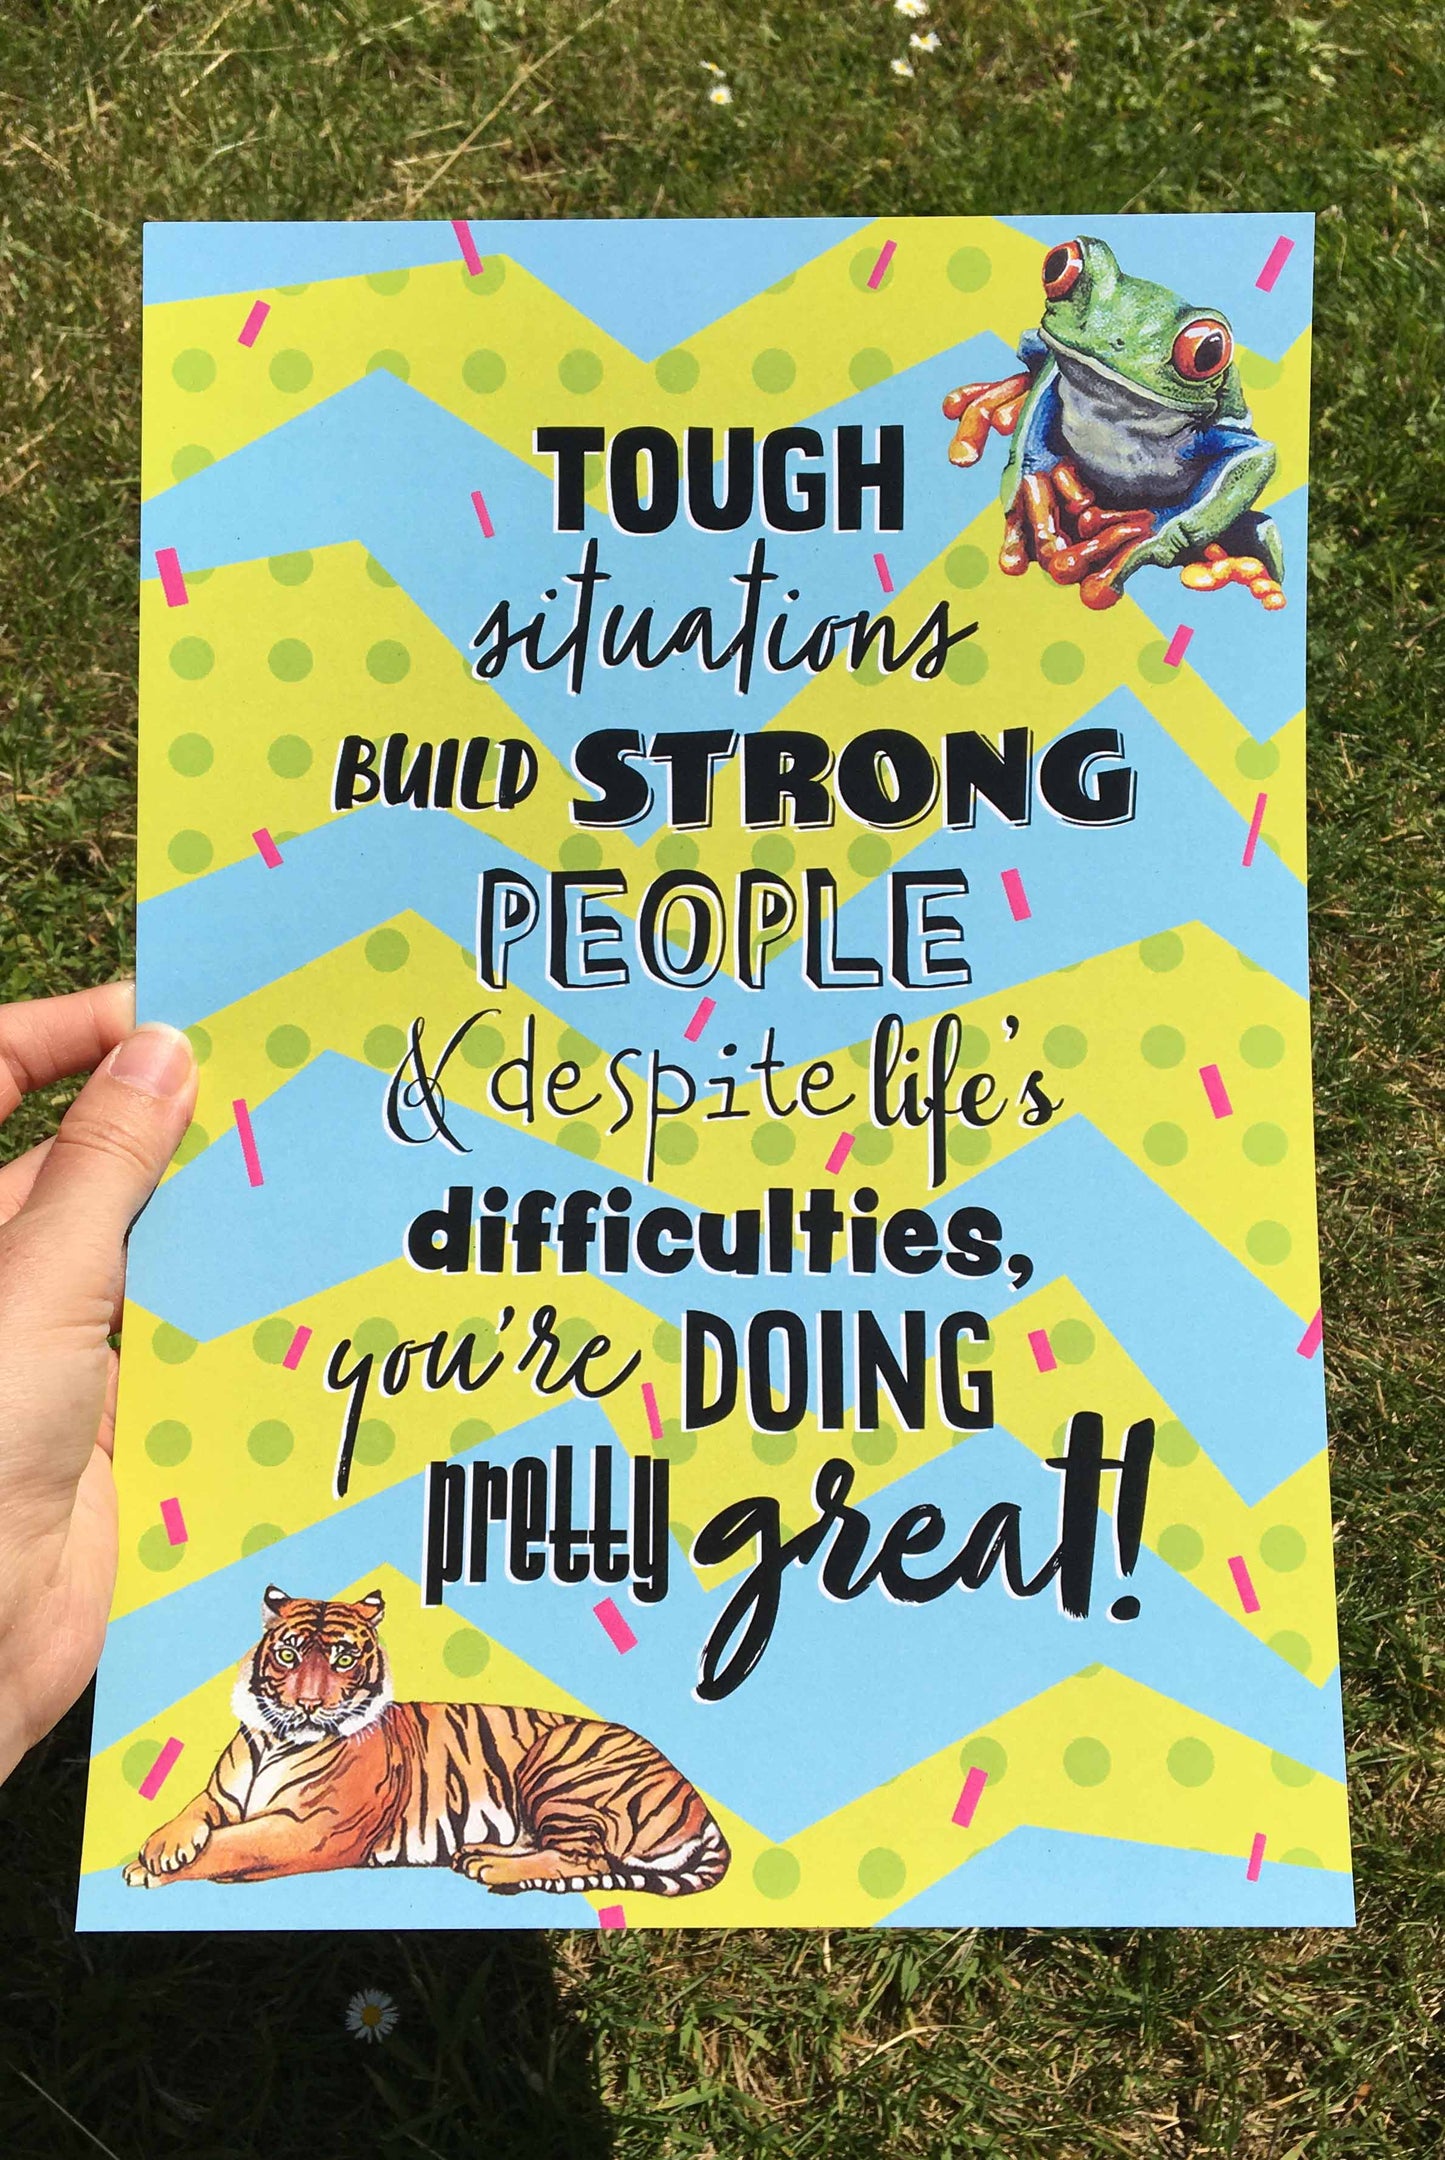 Photograph of an A4 Print; the design has a spotty green, and blue zigzag background covered in pink confetti lines, a tree frog top right, a tiger bottom left, and the words 'Tough situations build strong people & despite life's difficulties, you're doing pretty great!' in the centre. Artwork by Jenny Pond, JPArtwork